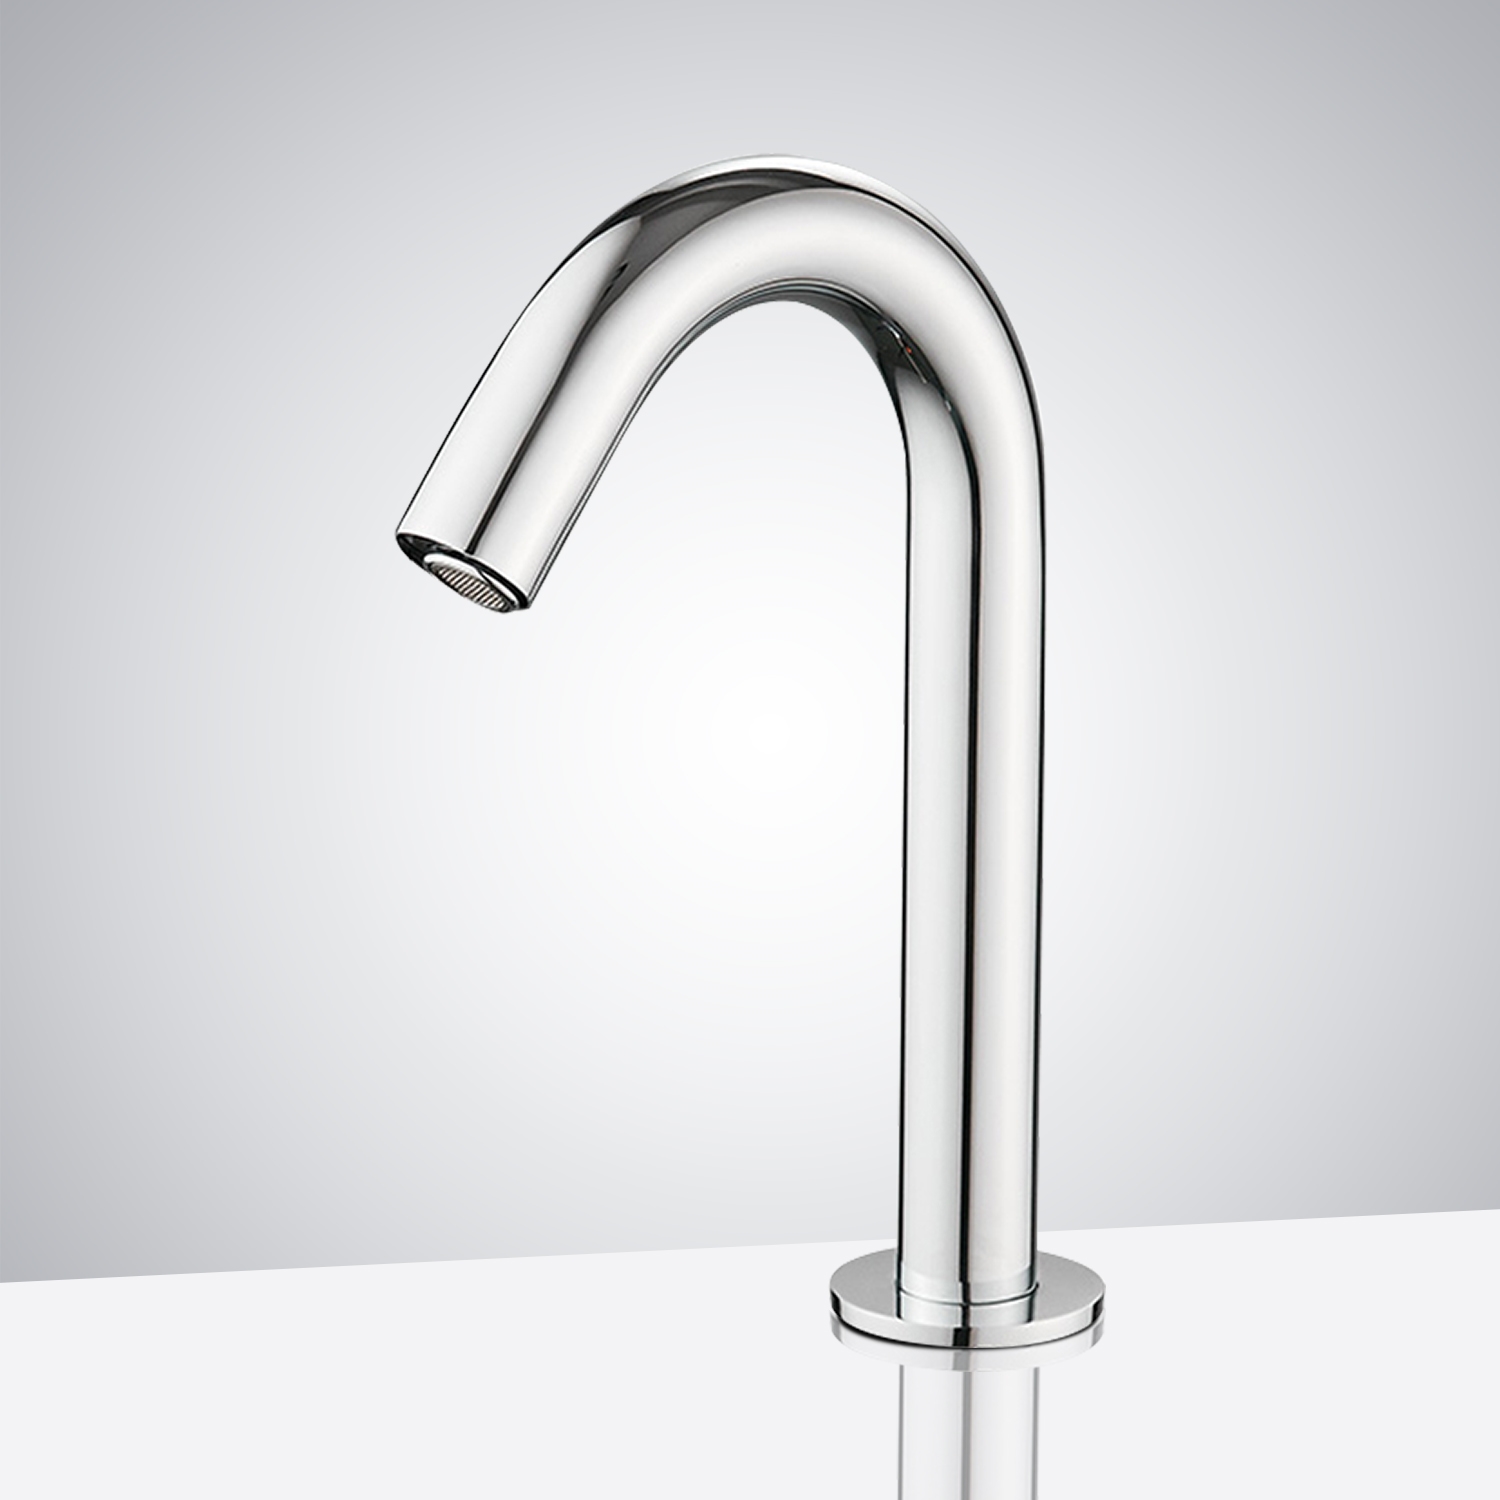 Fontana Napoli Commercial Stainless Steel Automatic Sensor Faucet